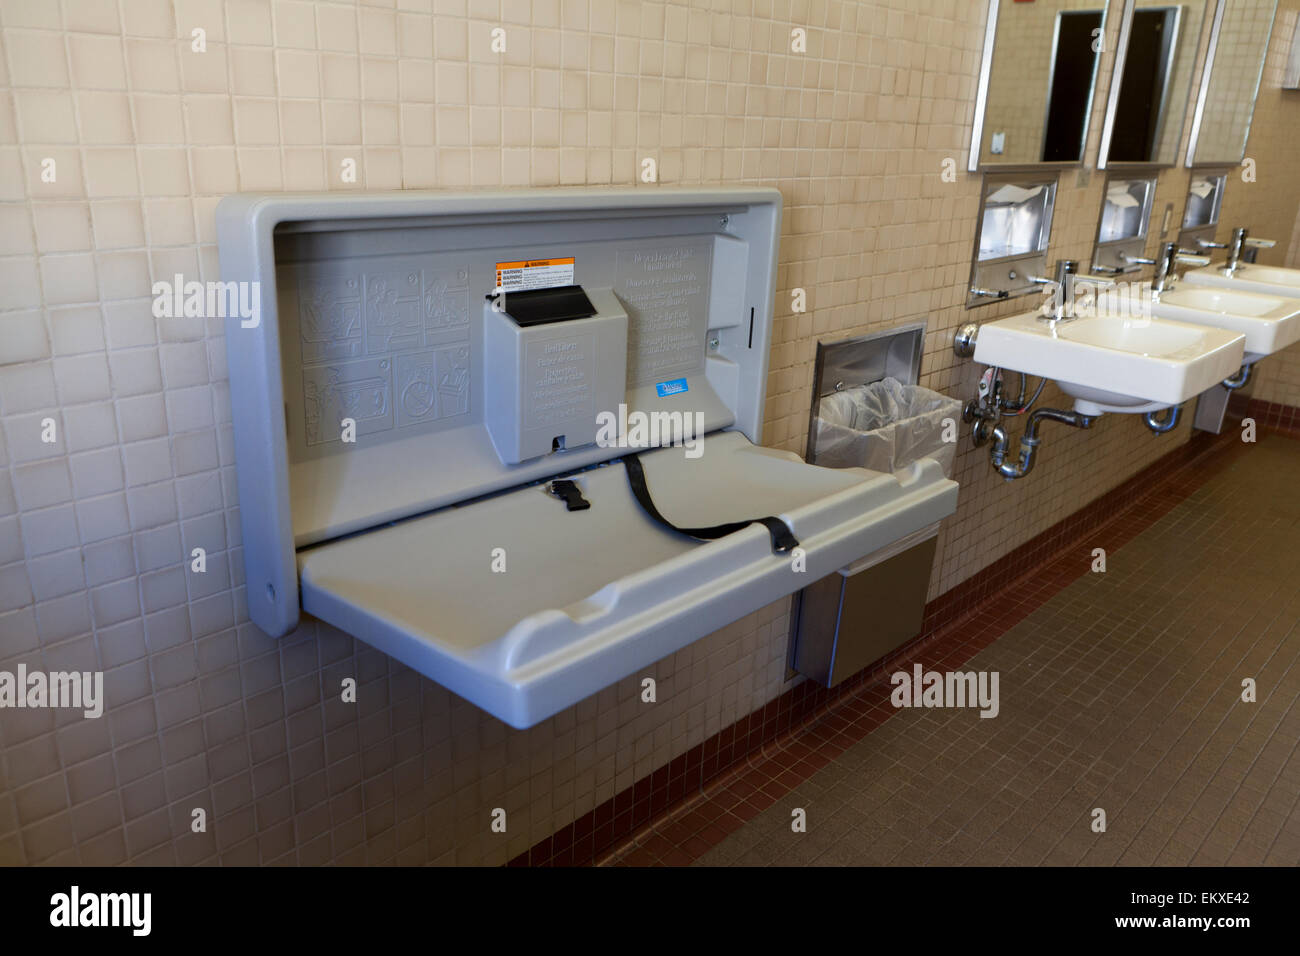 Folding baby changing table in public restroom - USA Stock Photo